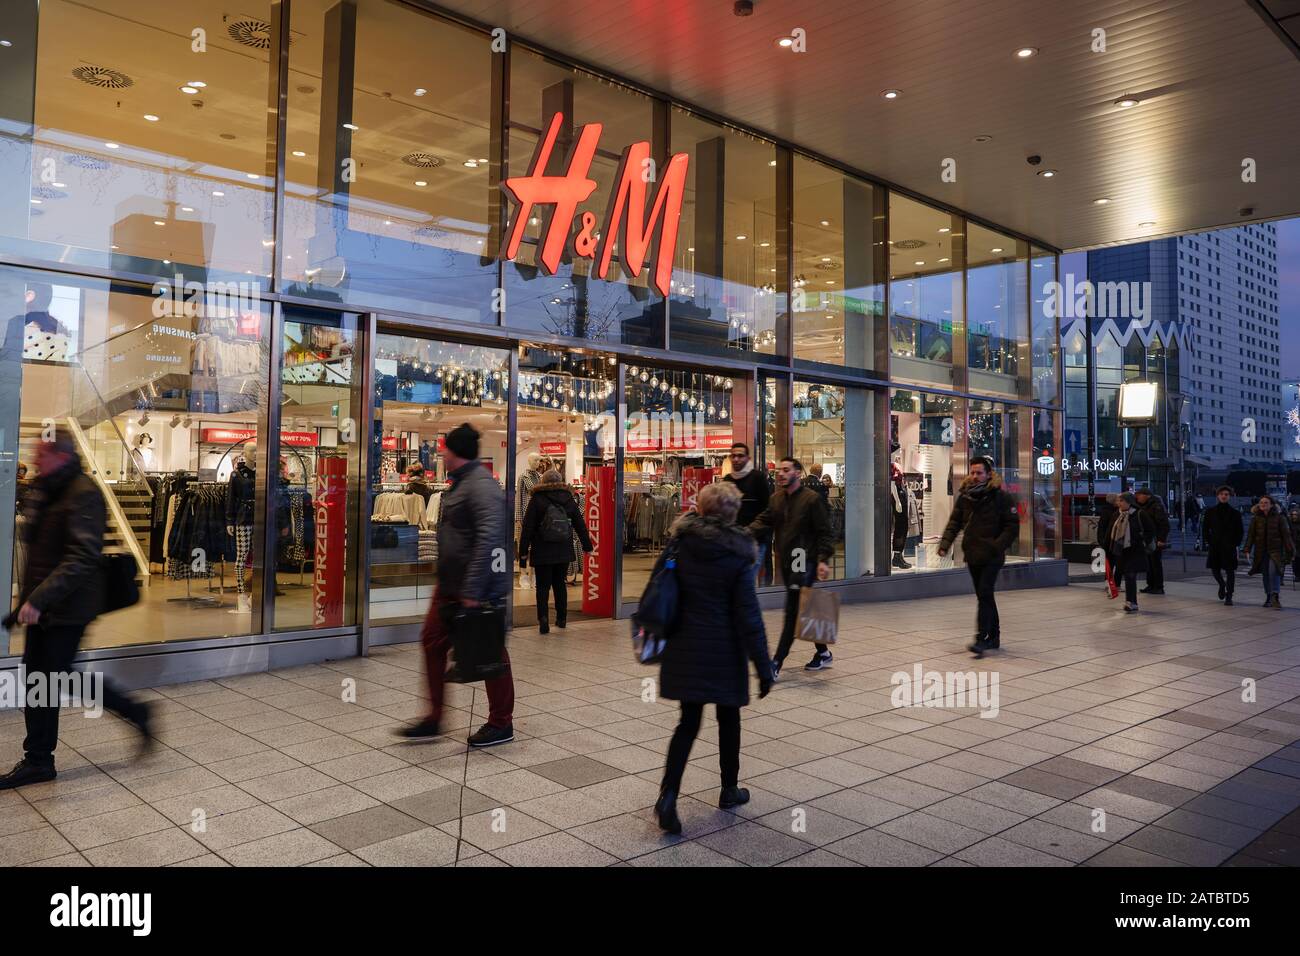 Warsaw, Poland - January 14, 2019: H&M store, clothing retail company in  the city center at night Stock Photo - Alamy